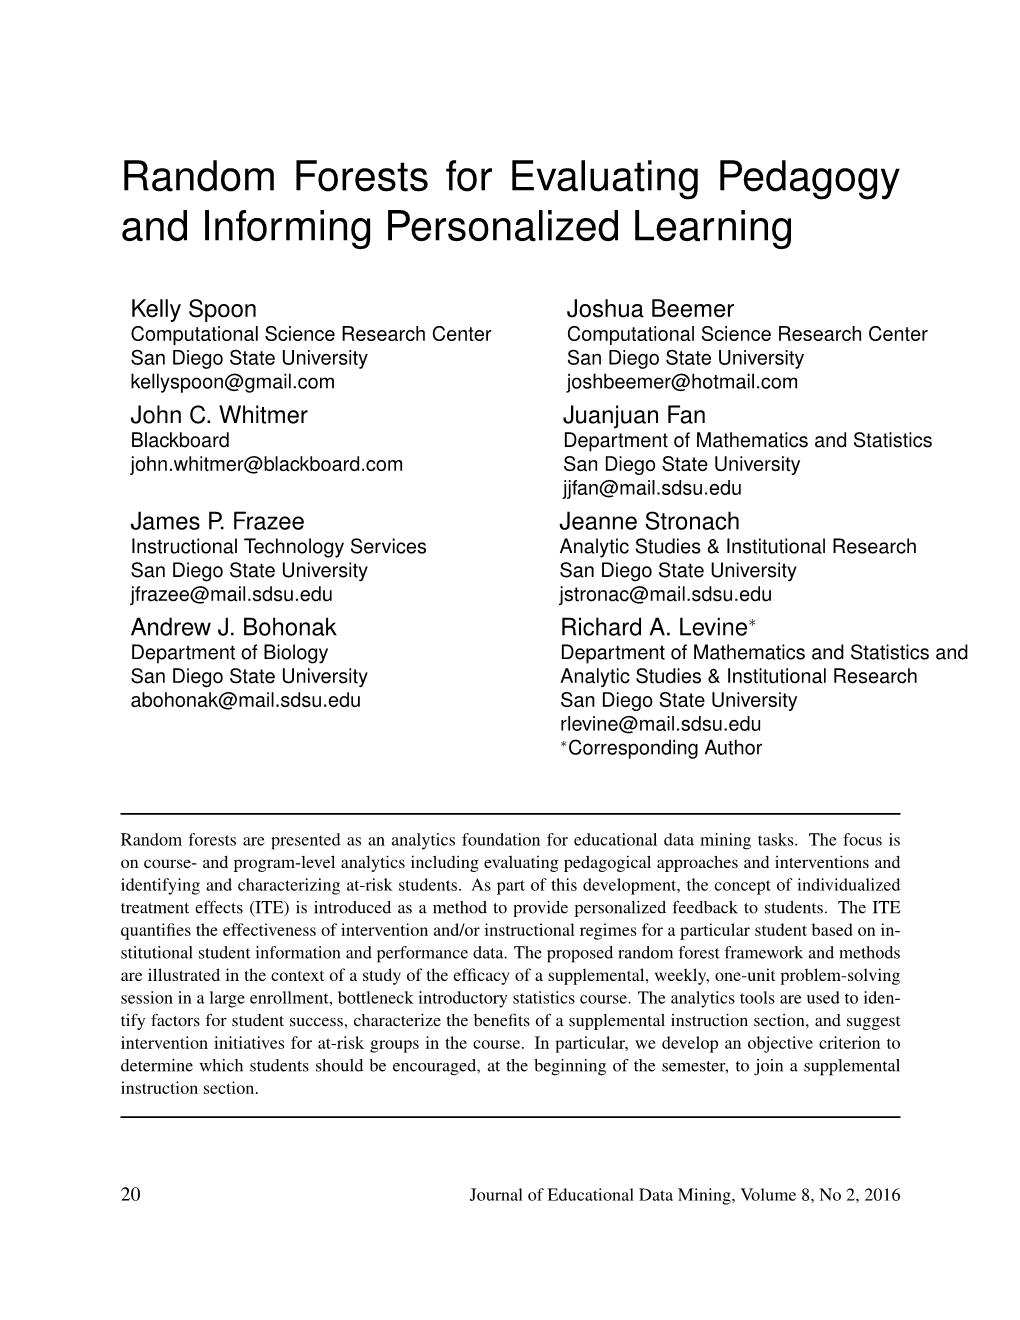 Random Forests for Evaluating Pedagogy and Informing Personalized Learning